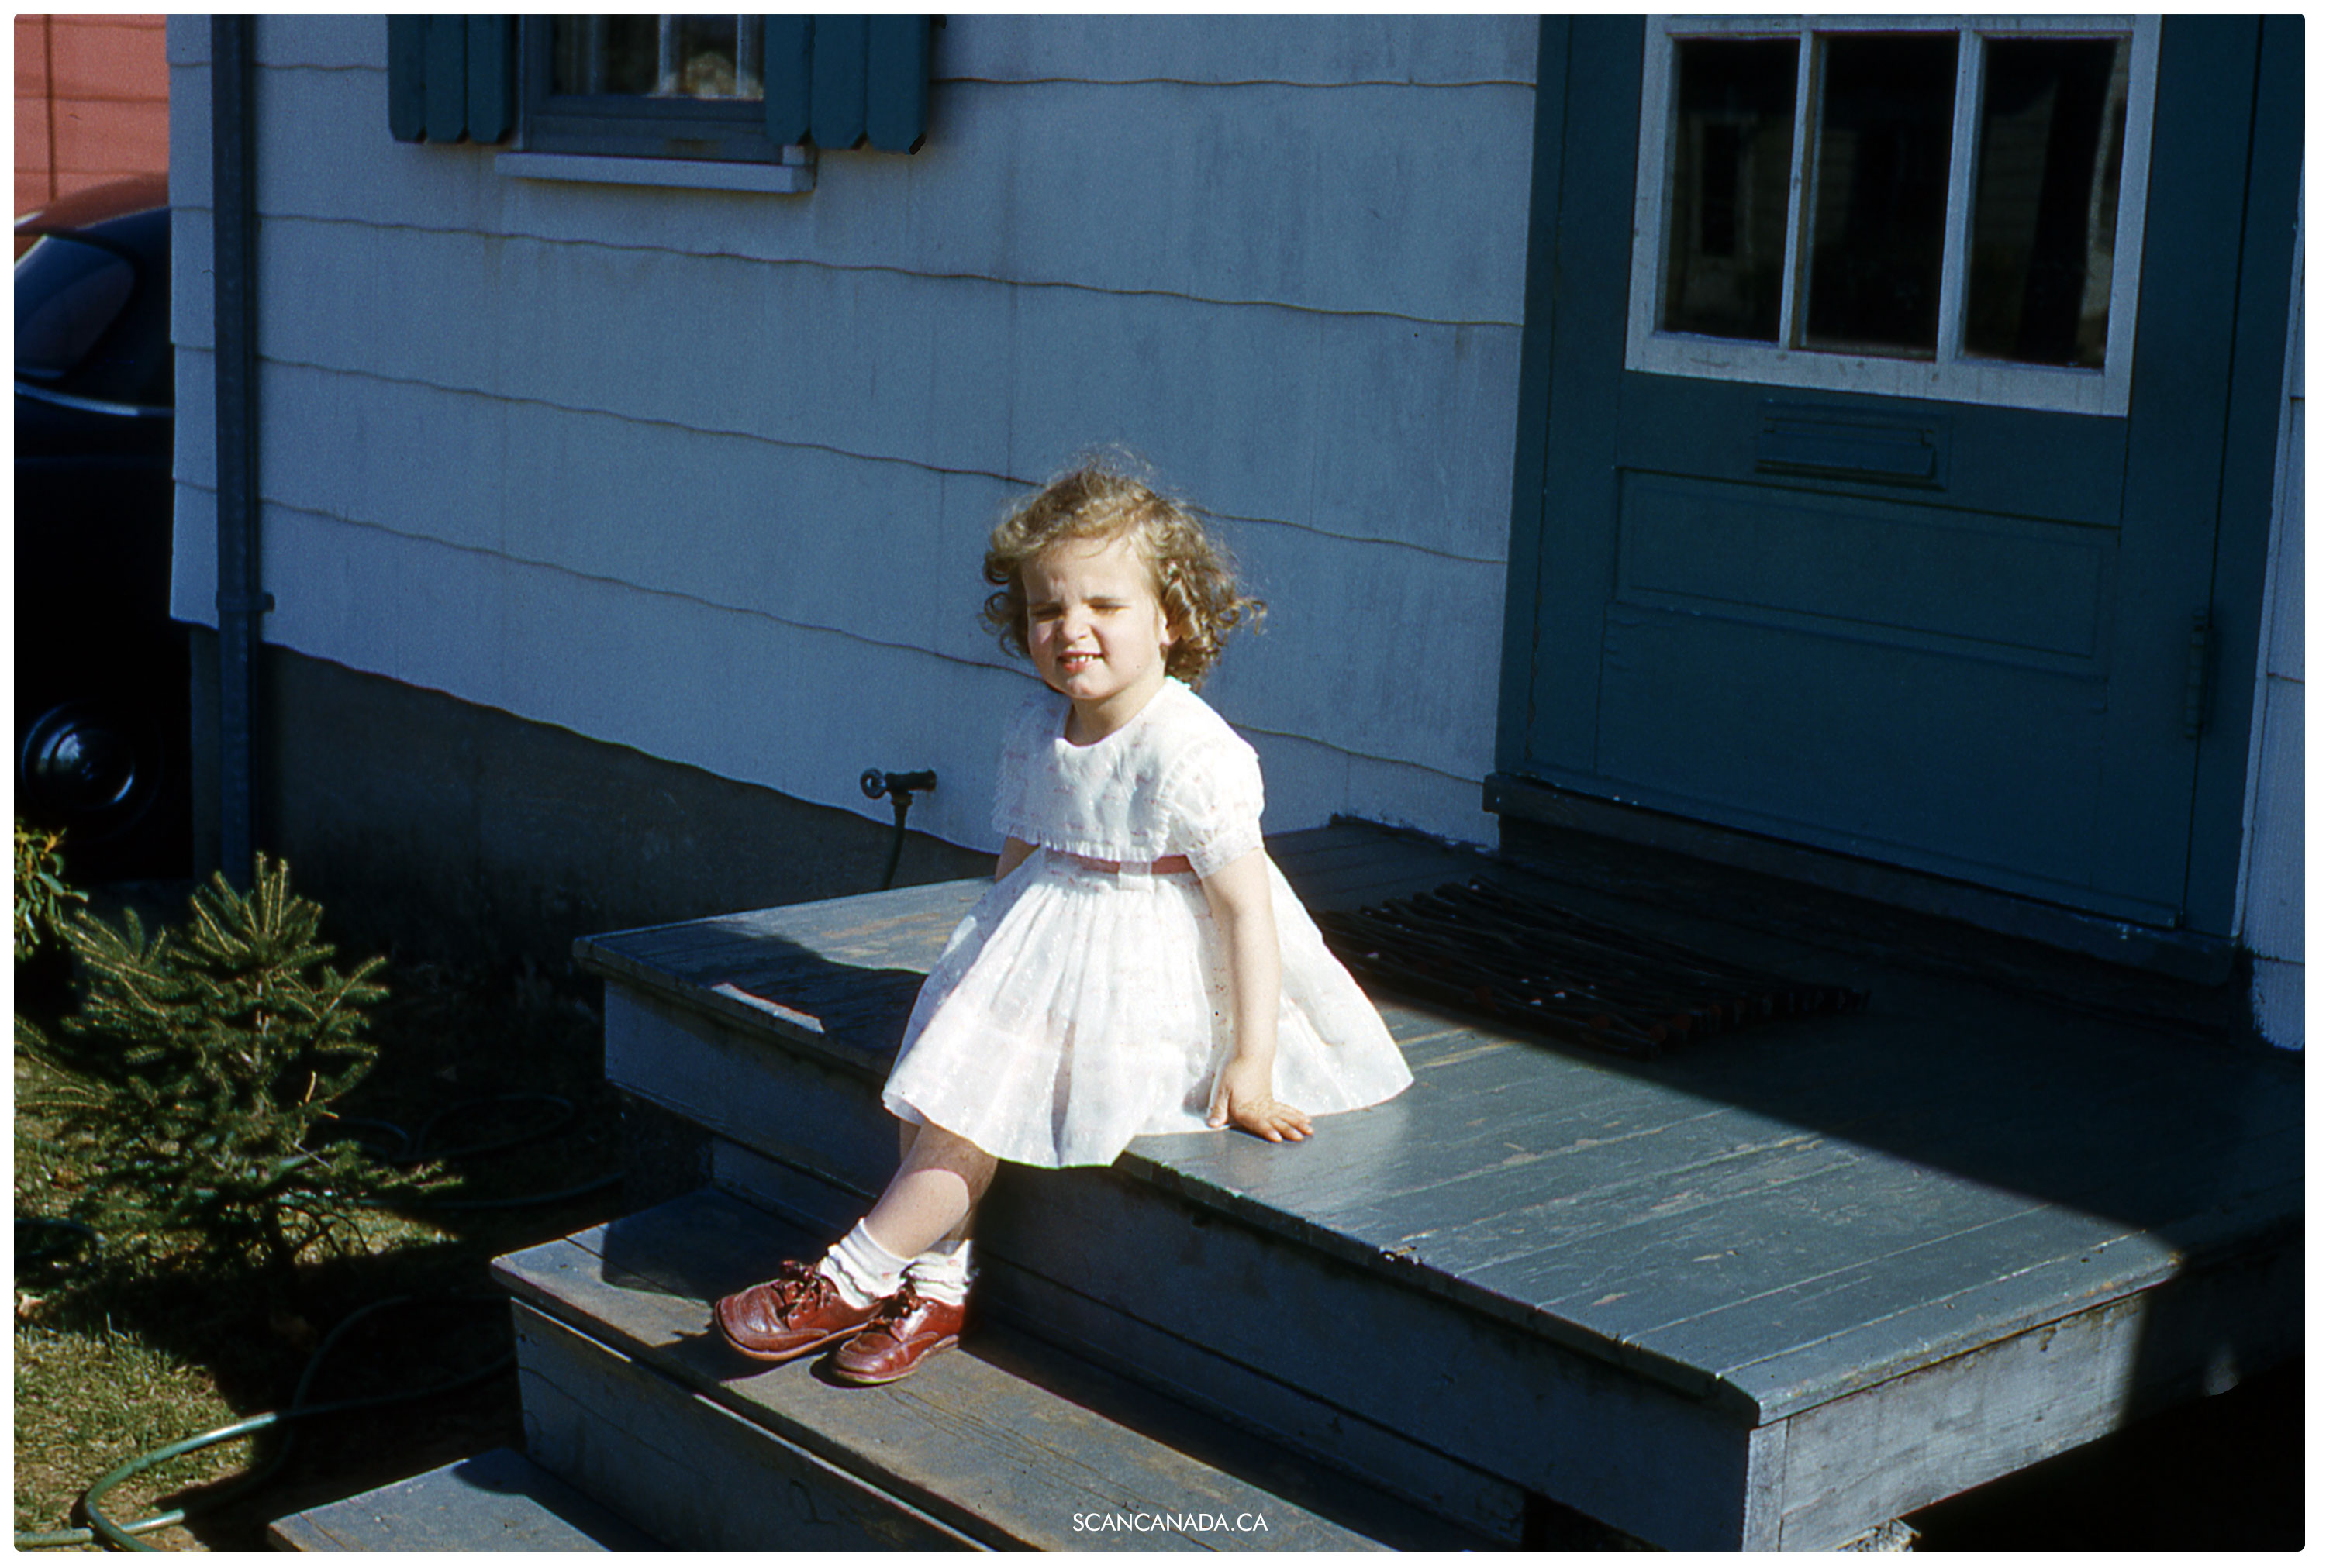 Show your kids wht your childhood home was by scanning your slides into digital.